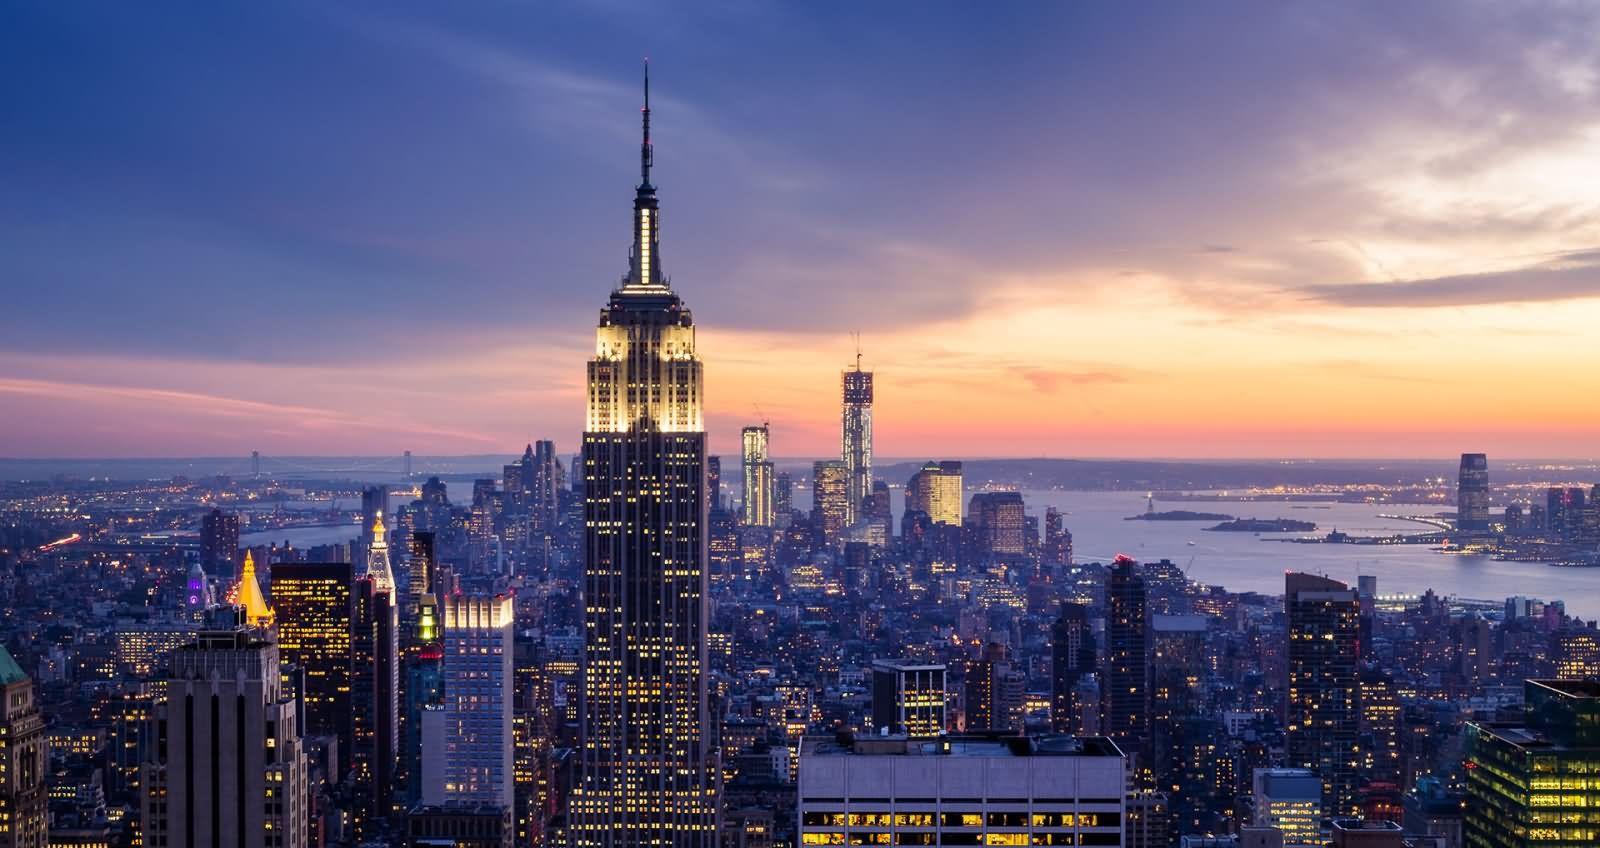 40 Most Adorable Empire State Building, Manhattan Night View